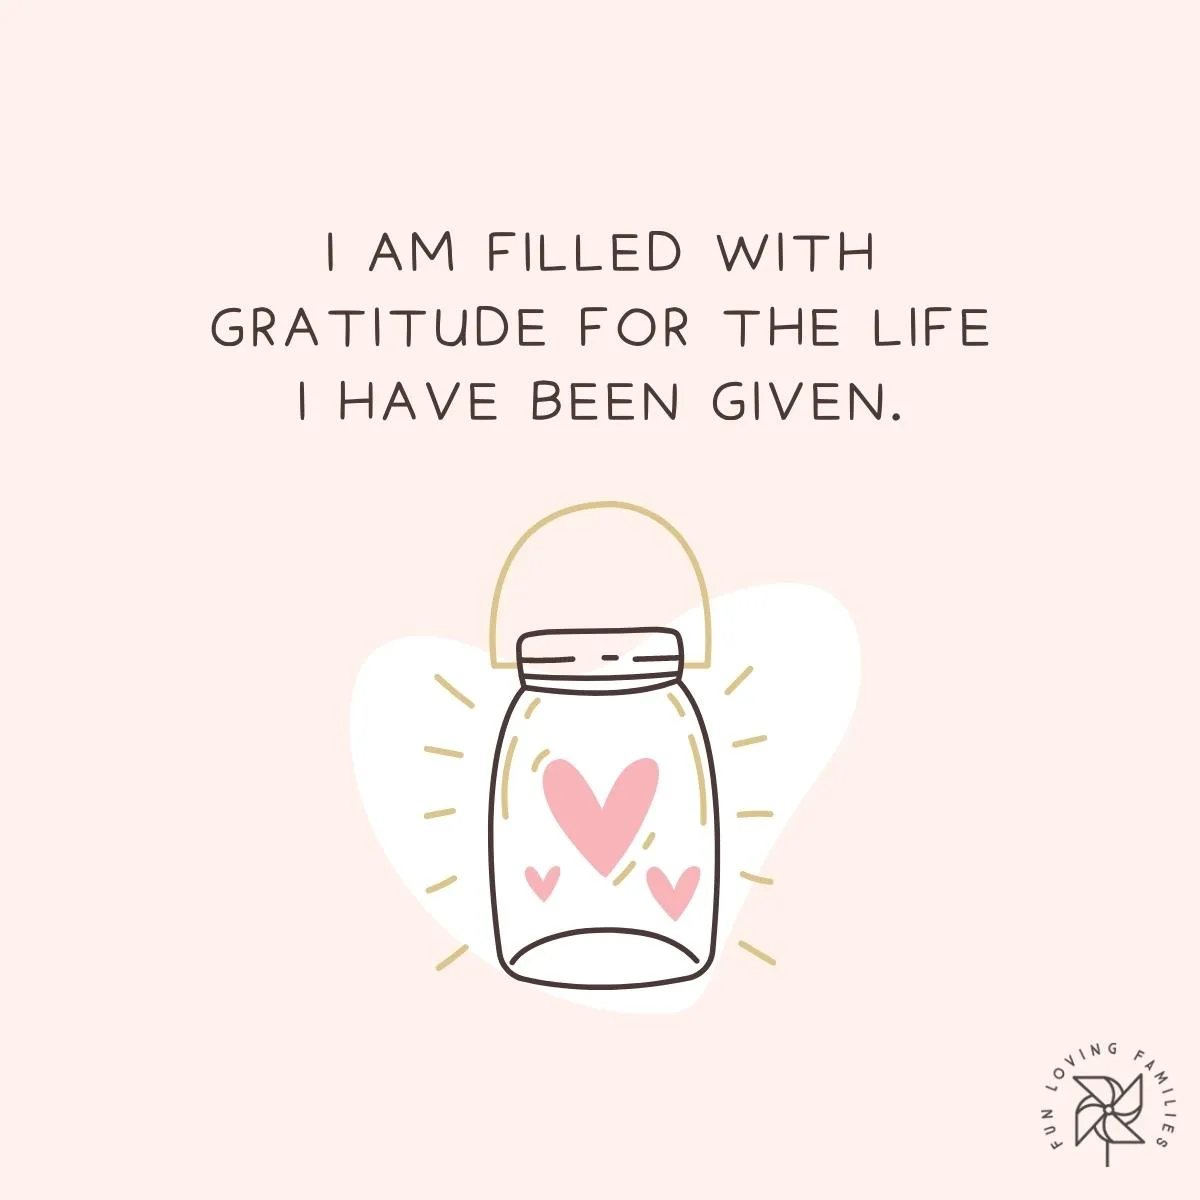 I am filled with gratitude for the life I have been given affirmation